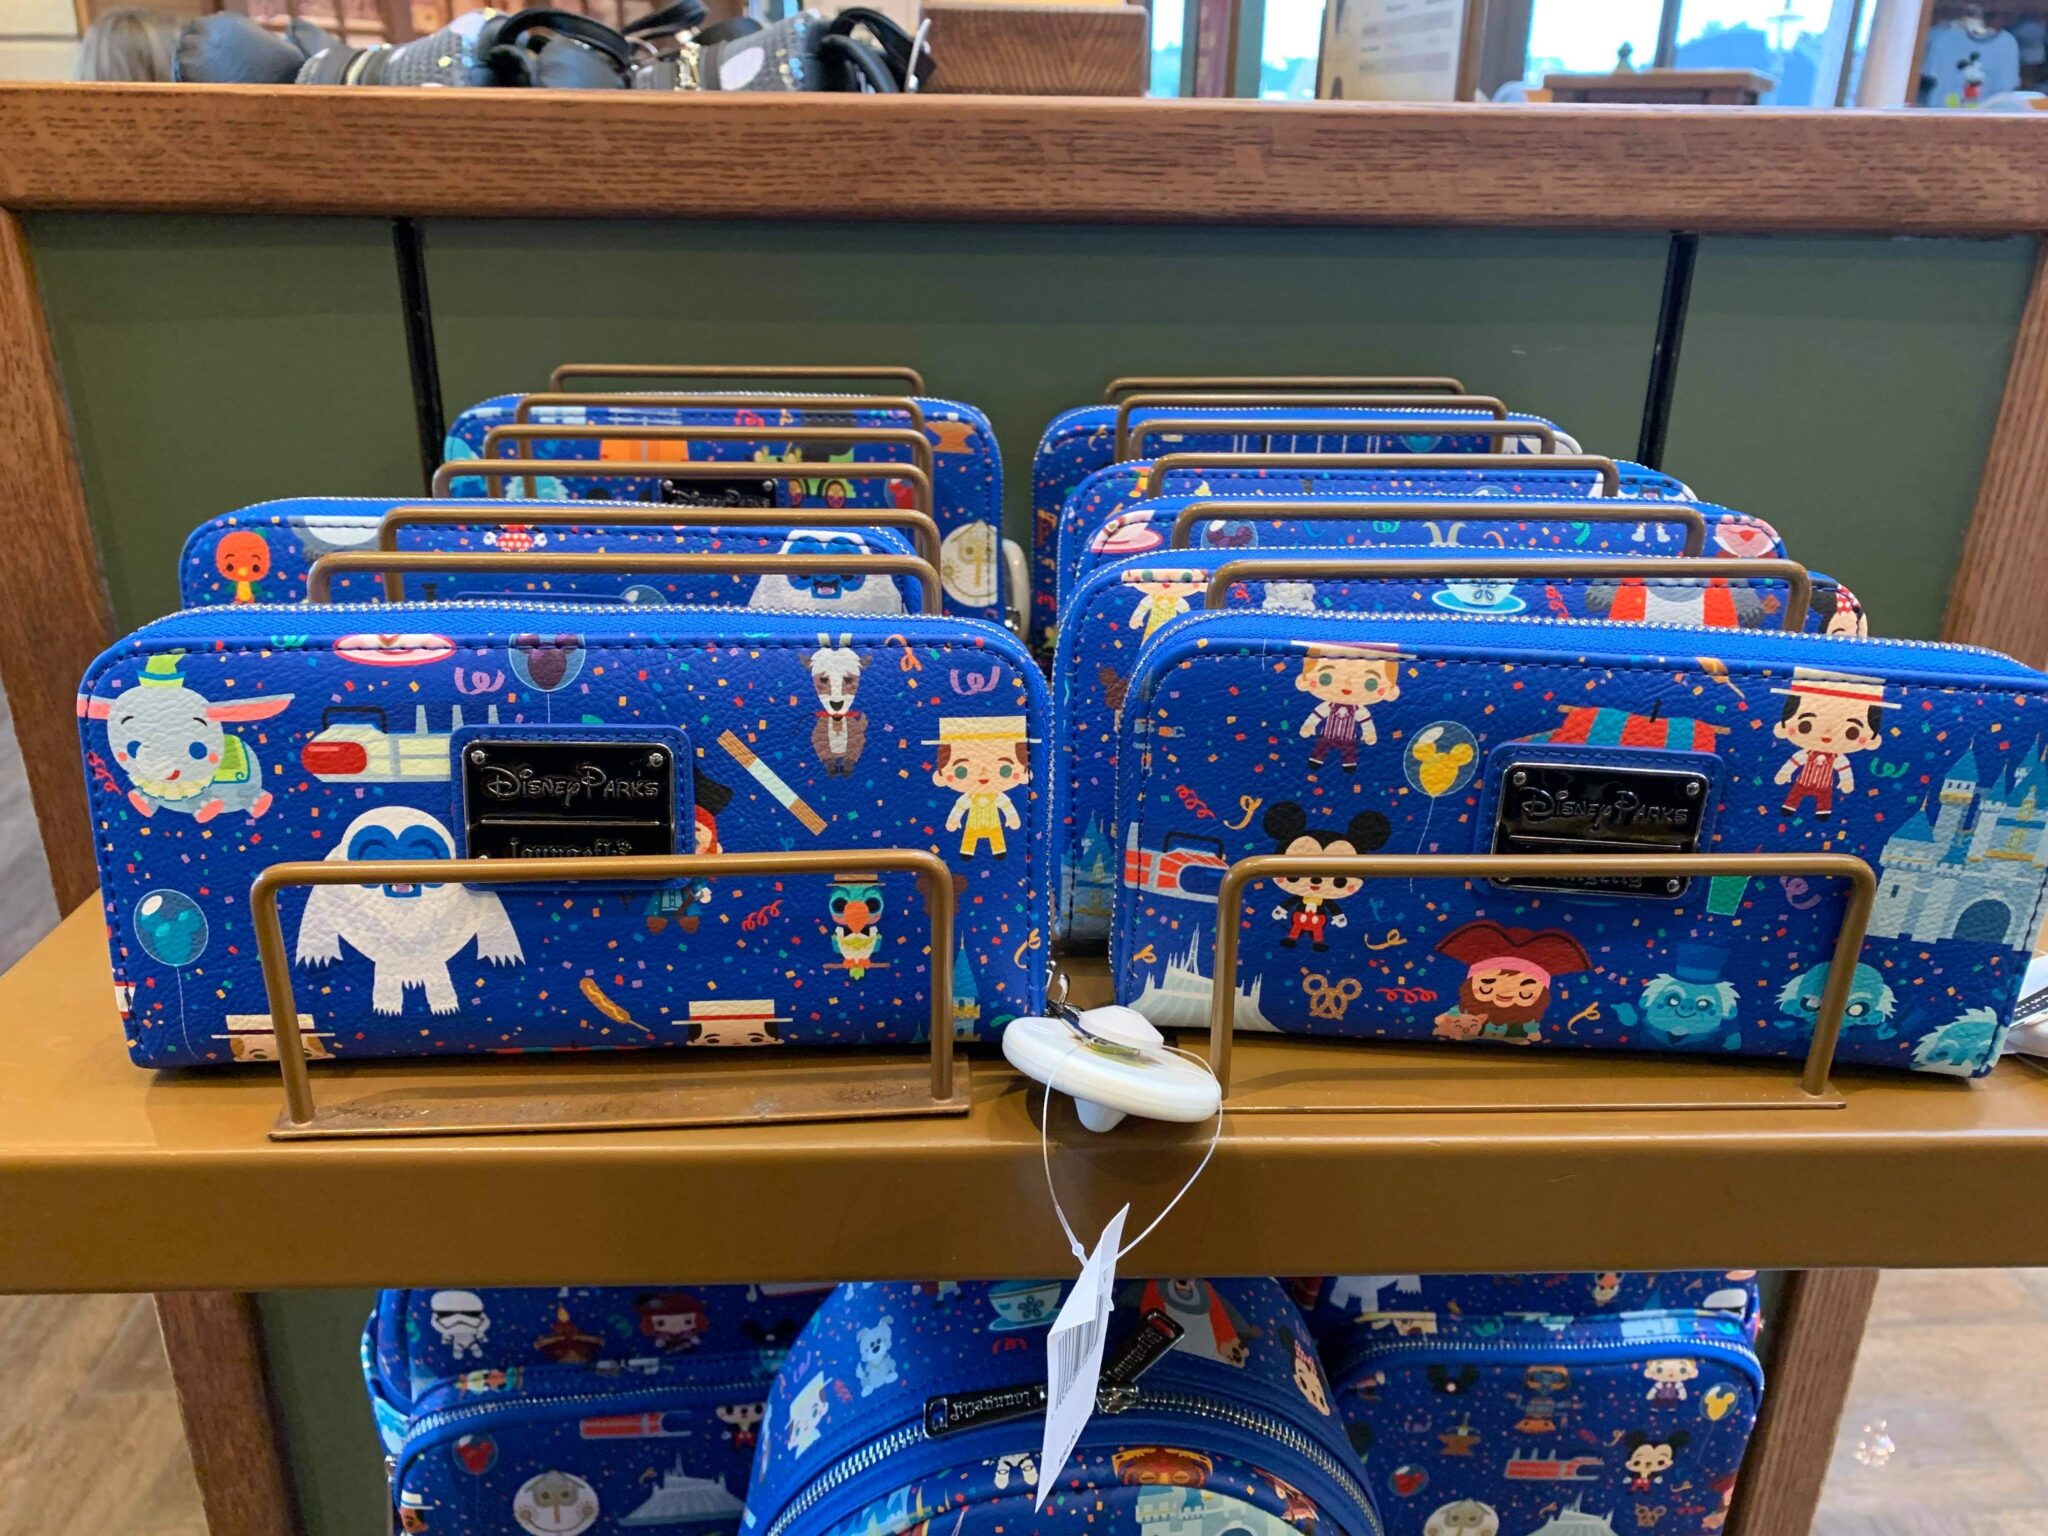 New Disney Parks Loungefly Seen at Epcot Chip and Company